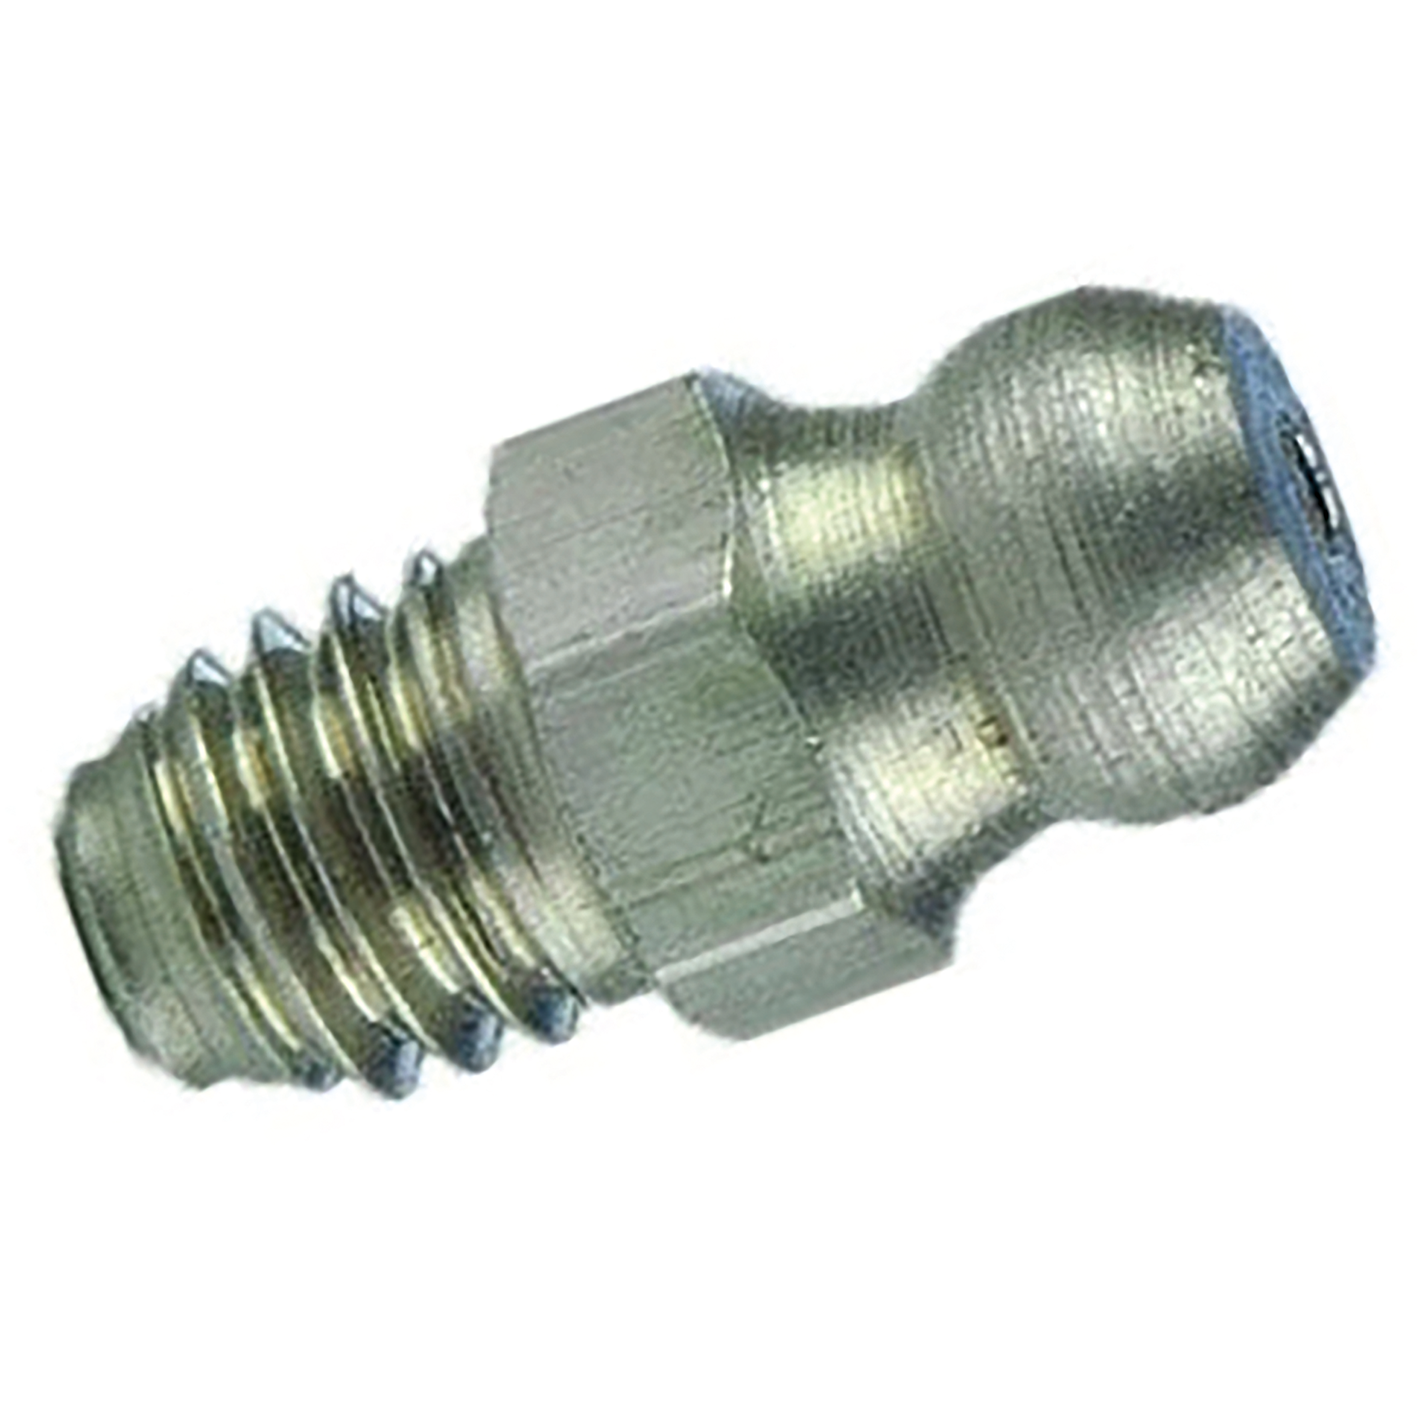 1/4" UNF STRAIGHT GREASE NIPPLE - STAINLESS STEEL